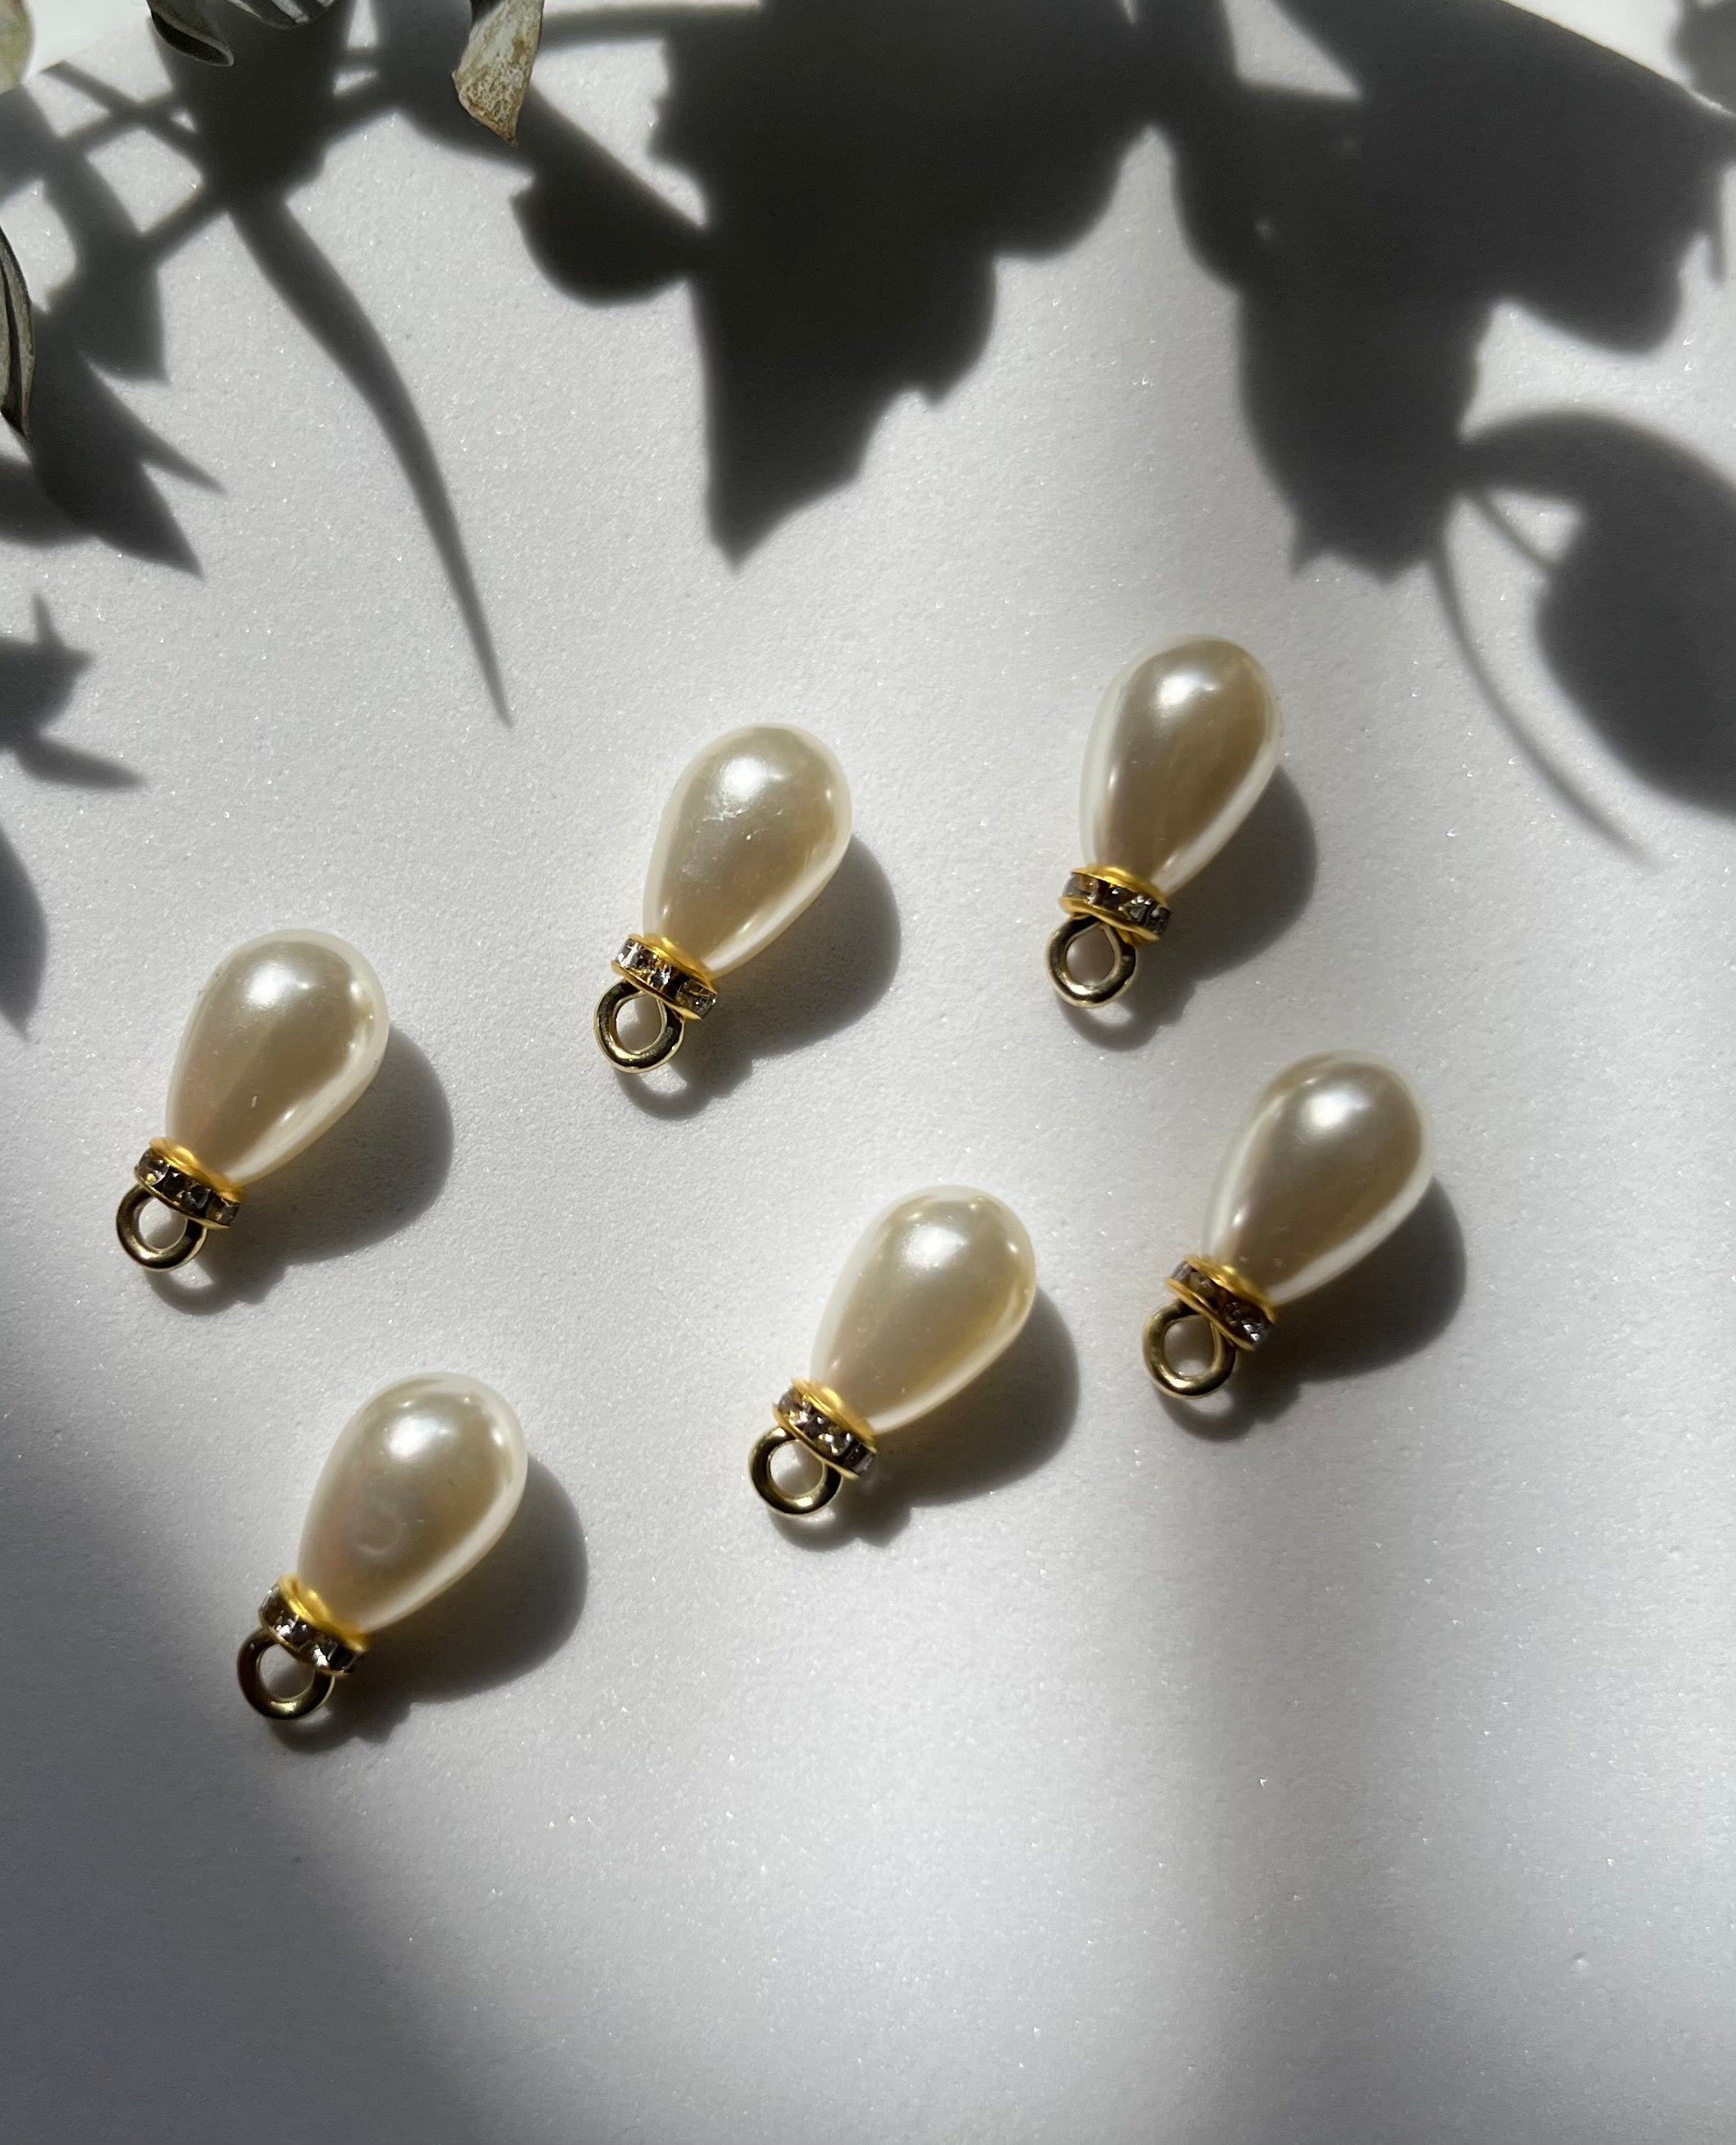 Acrylic Pearl Pendant Water Drop Pearl Charms (gold)- 10 pieces